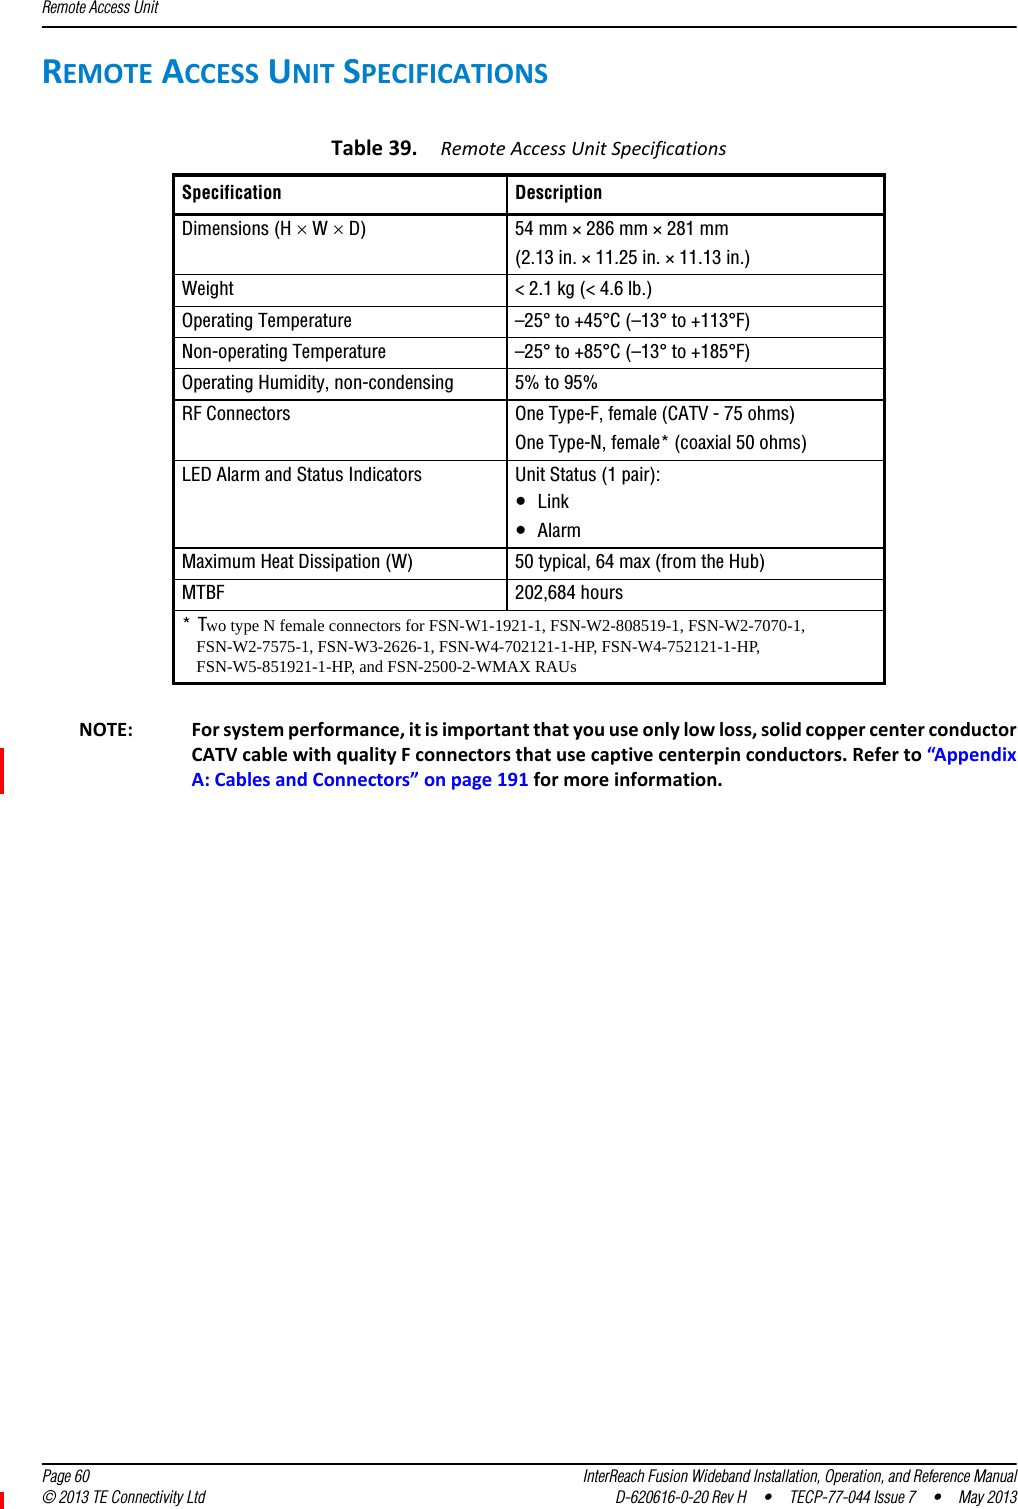 Remote Access Unit  Page 60 InterReach Fusion Wideband Installation, Operation, and Reference Manual© 2013 TE Connectivity Ltd D-620616-0-20 Rev H  •  TECP-77-044 Issue 7  •  May 2013REMOTEACCESSUNITSPECIFICATIONSNOTE: Forsystemperformance,itisimportantthatyouuseonlylowloss,solidcoppercenterconductorCATVcablewithqualityFconnectorsthatusecaptivecenterpinconductors.Referto“AppendixA:CablesandConnectors”onpage191formoreinformation.Table39.RemoteAccessUnitSpecificationsSpecification DescriptionDimensions (H  W  D) 54 mm × 286 mm × 281 mm(2.13 in. × 11.25 in. × 11.13 in.)Weight &lt; 2.1 kg (&lt; 4.6 lb.)Operating Temperature –25° to +45°C (–13° to +113°F)Non-operating Temperature –25° to +85°C (–13° to +185°F)Operating Humidity, non-condensing 5% to 95%RF Connectors One Type-F, female (CATV - 75 ohms)One Type-N, female* (coaxial 50 ohms) LED Alarm and Status Indicators Unit Status (1 pair):•Link•AlarmMaximum Heat Dissipation (W) 50 typical, 64 max (from the Hub)MTBF 202,684 hours *Two type N female connectors for FSN-W1-1921-1, FSN-W2-808519-1, FSN-W2-7070-1, FSN-W2-7575-1, FSN-W3-2626-1, FSN-W4-702121-1-HP, FSN-W4-752121-1-HP, FSN-W5-851921-1-HP, and FSN-2500-2-WMAX RAUs